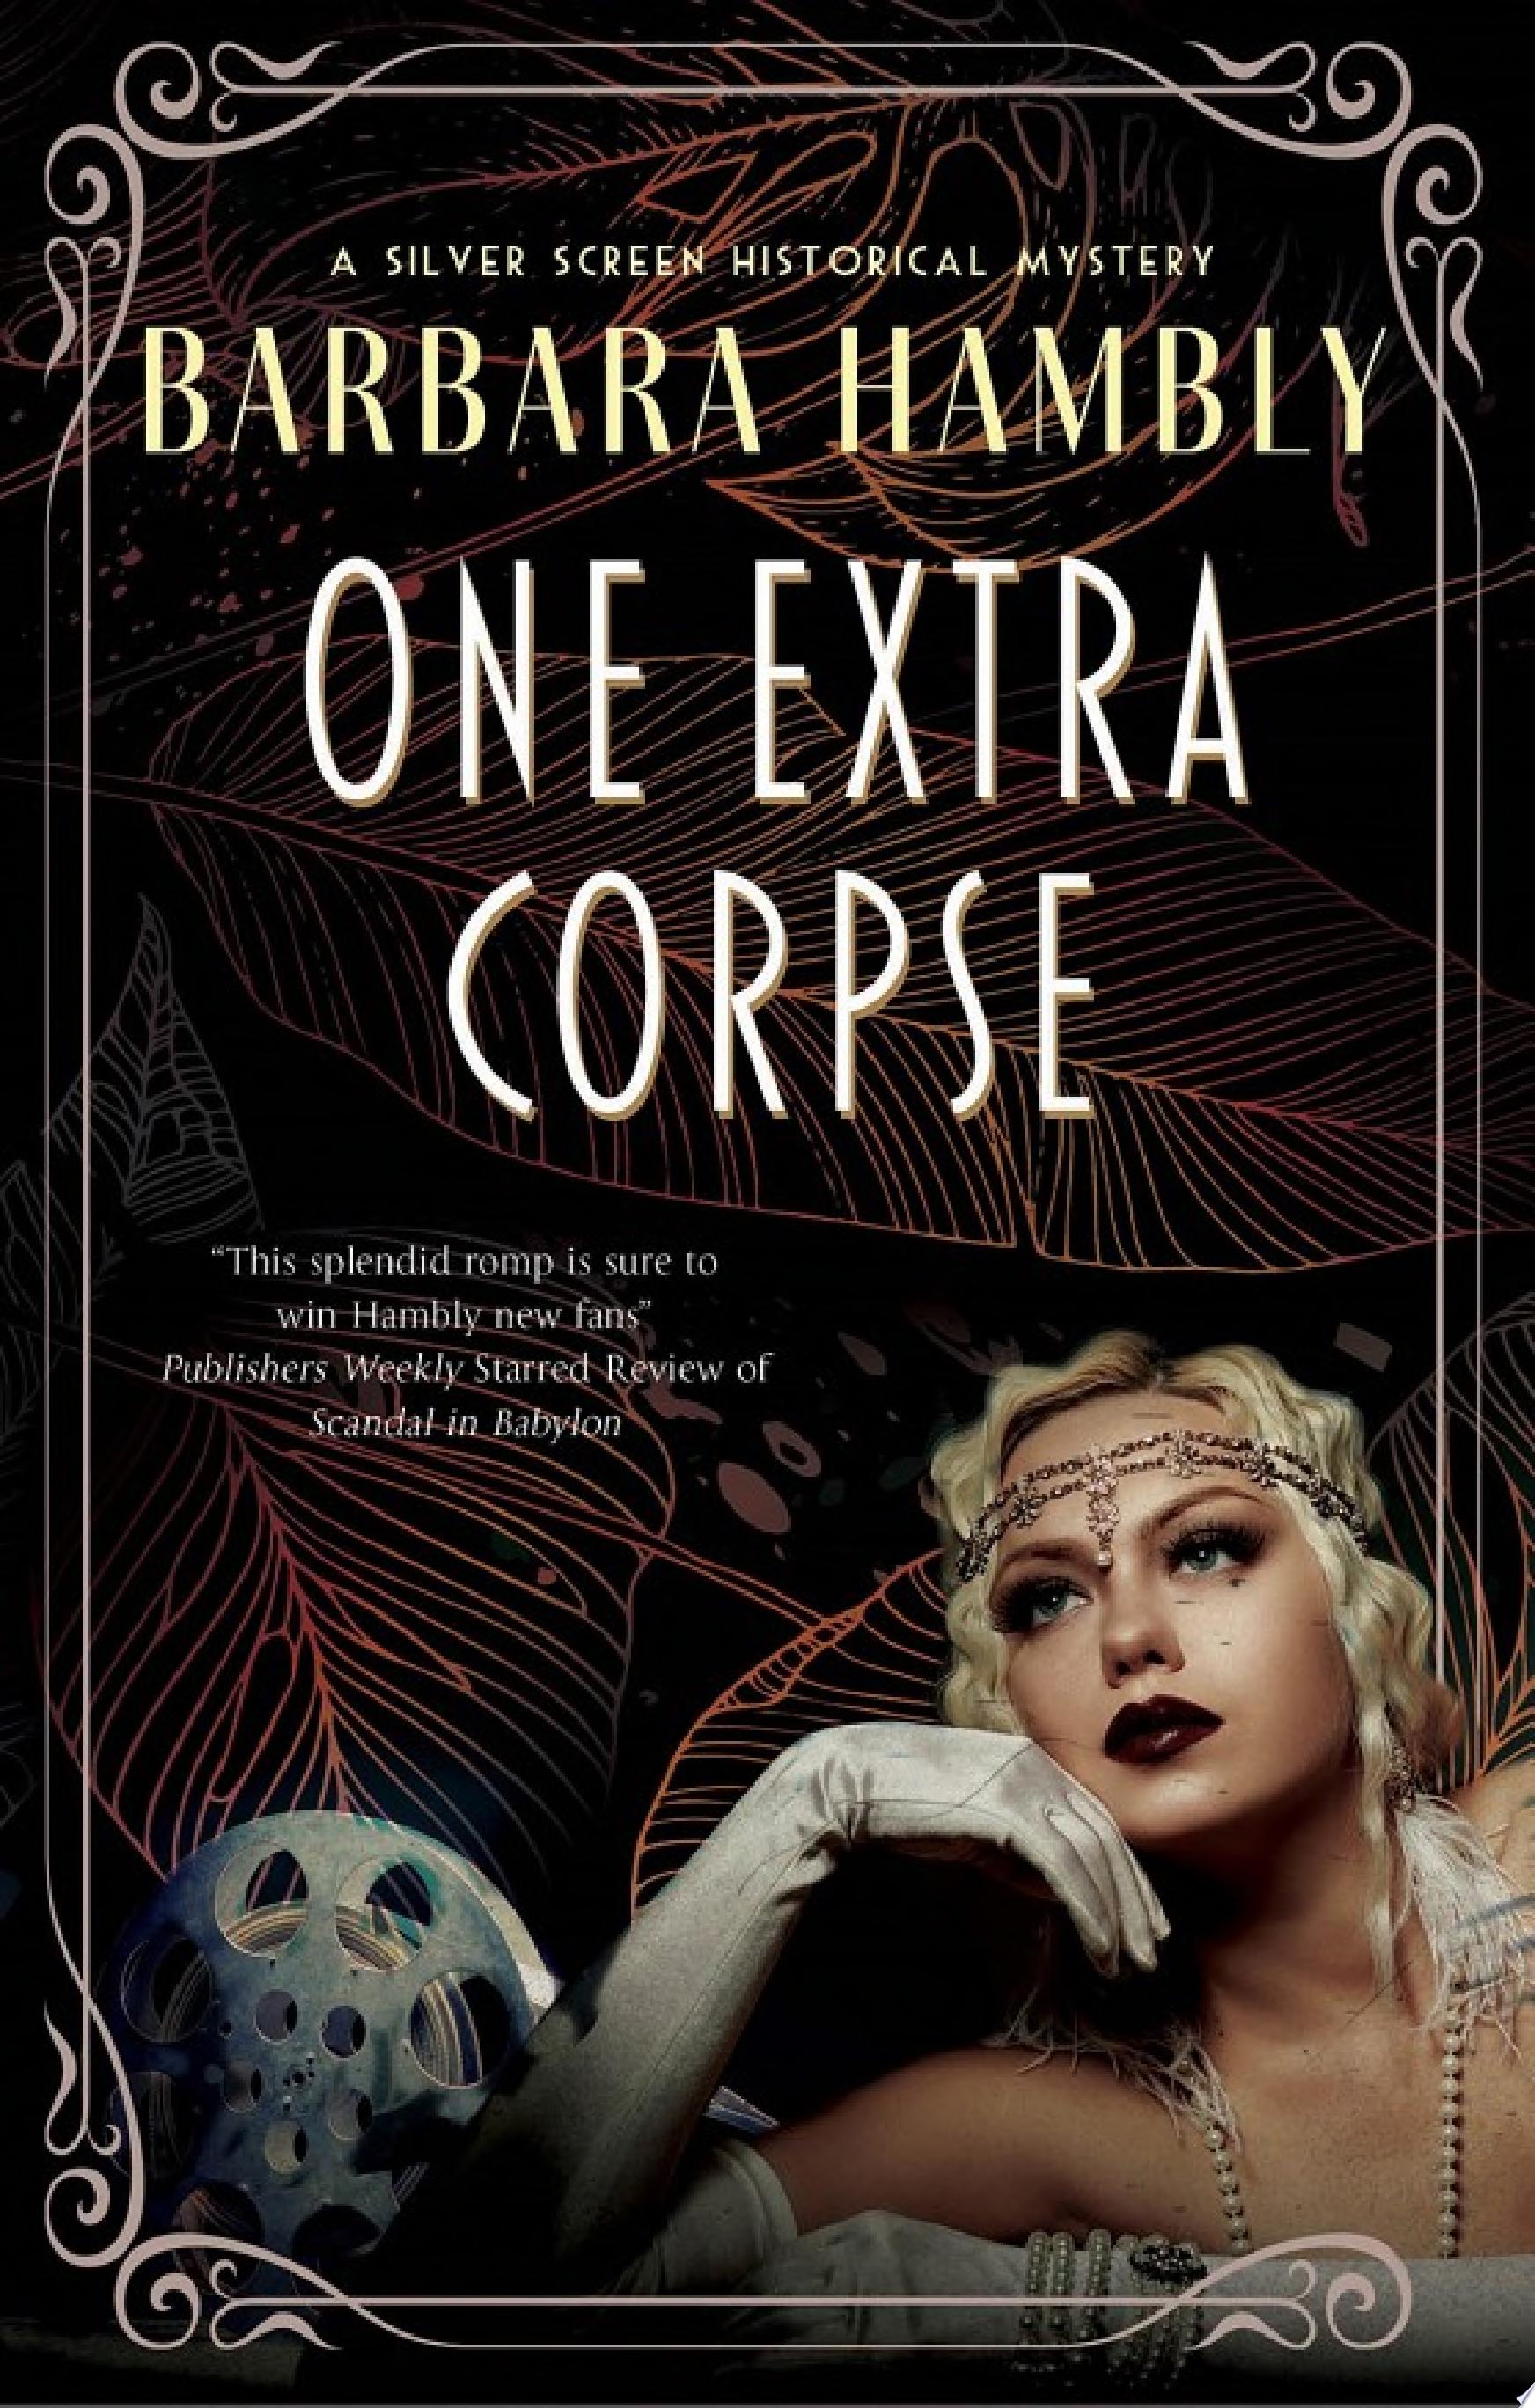 Image for "One Extra Corpse"